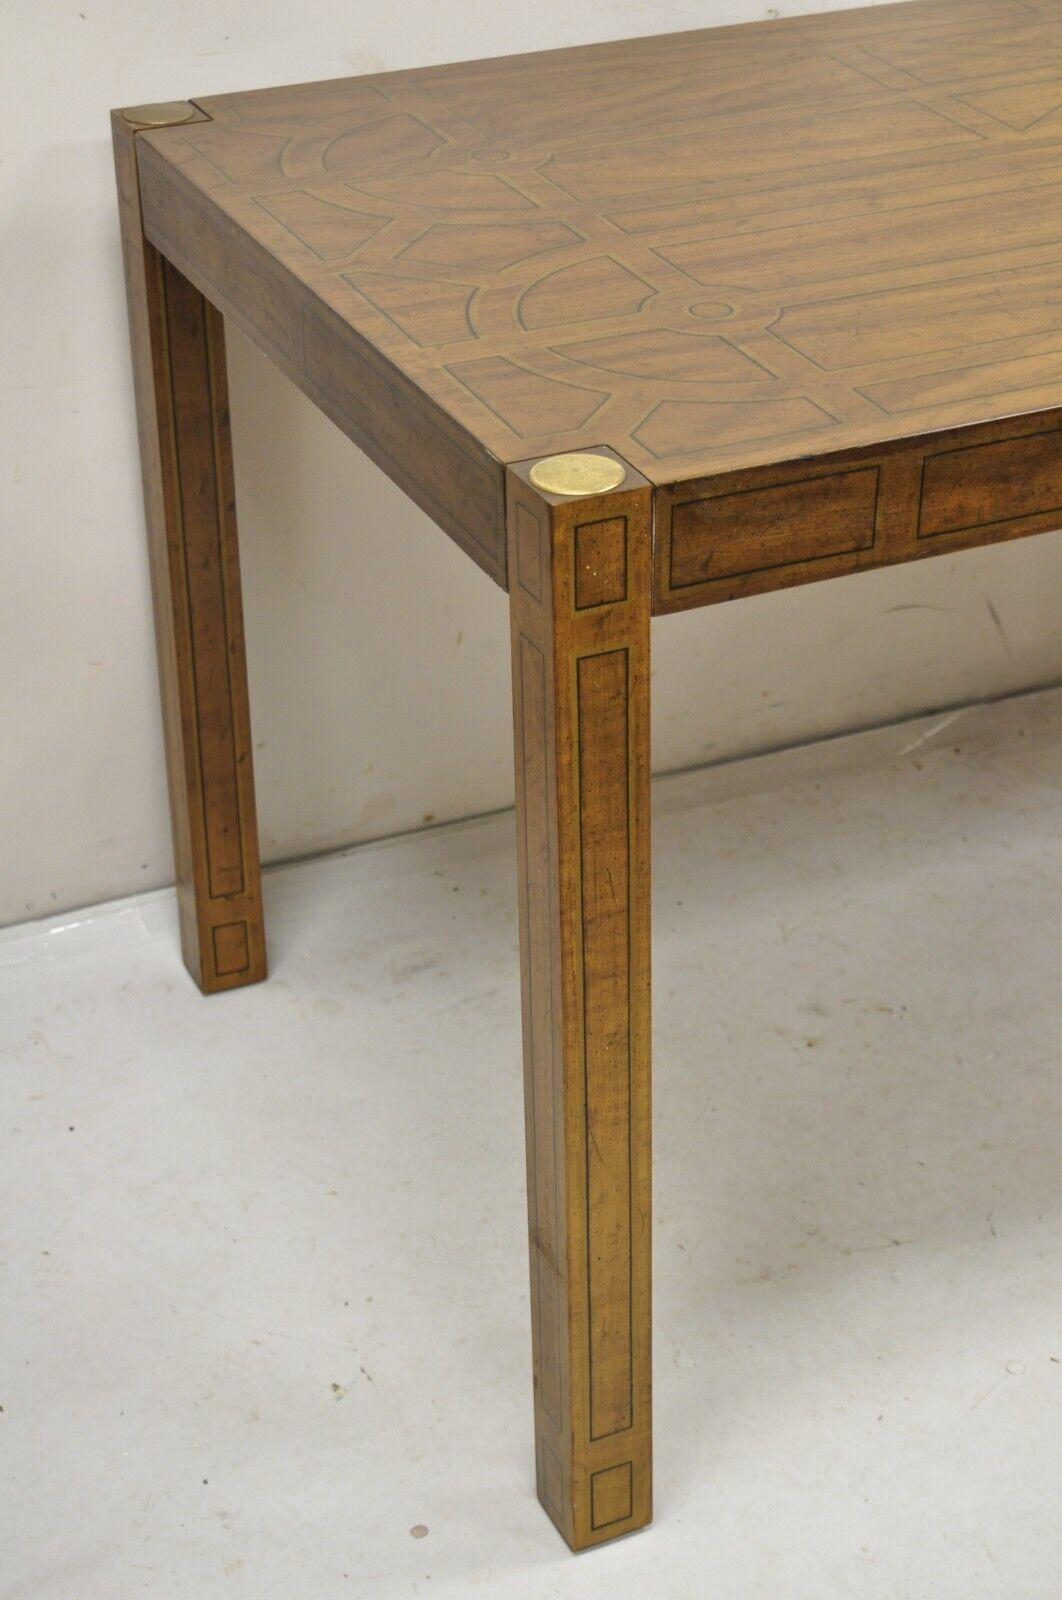 Drexel Oxford Square Geometric Painted Parsons Style Console Desk Dining Table In Good Condition For Sale In Philadelphia, PA